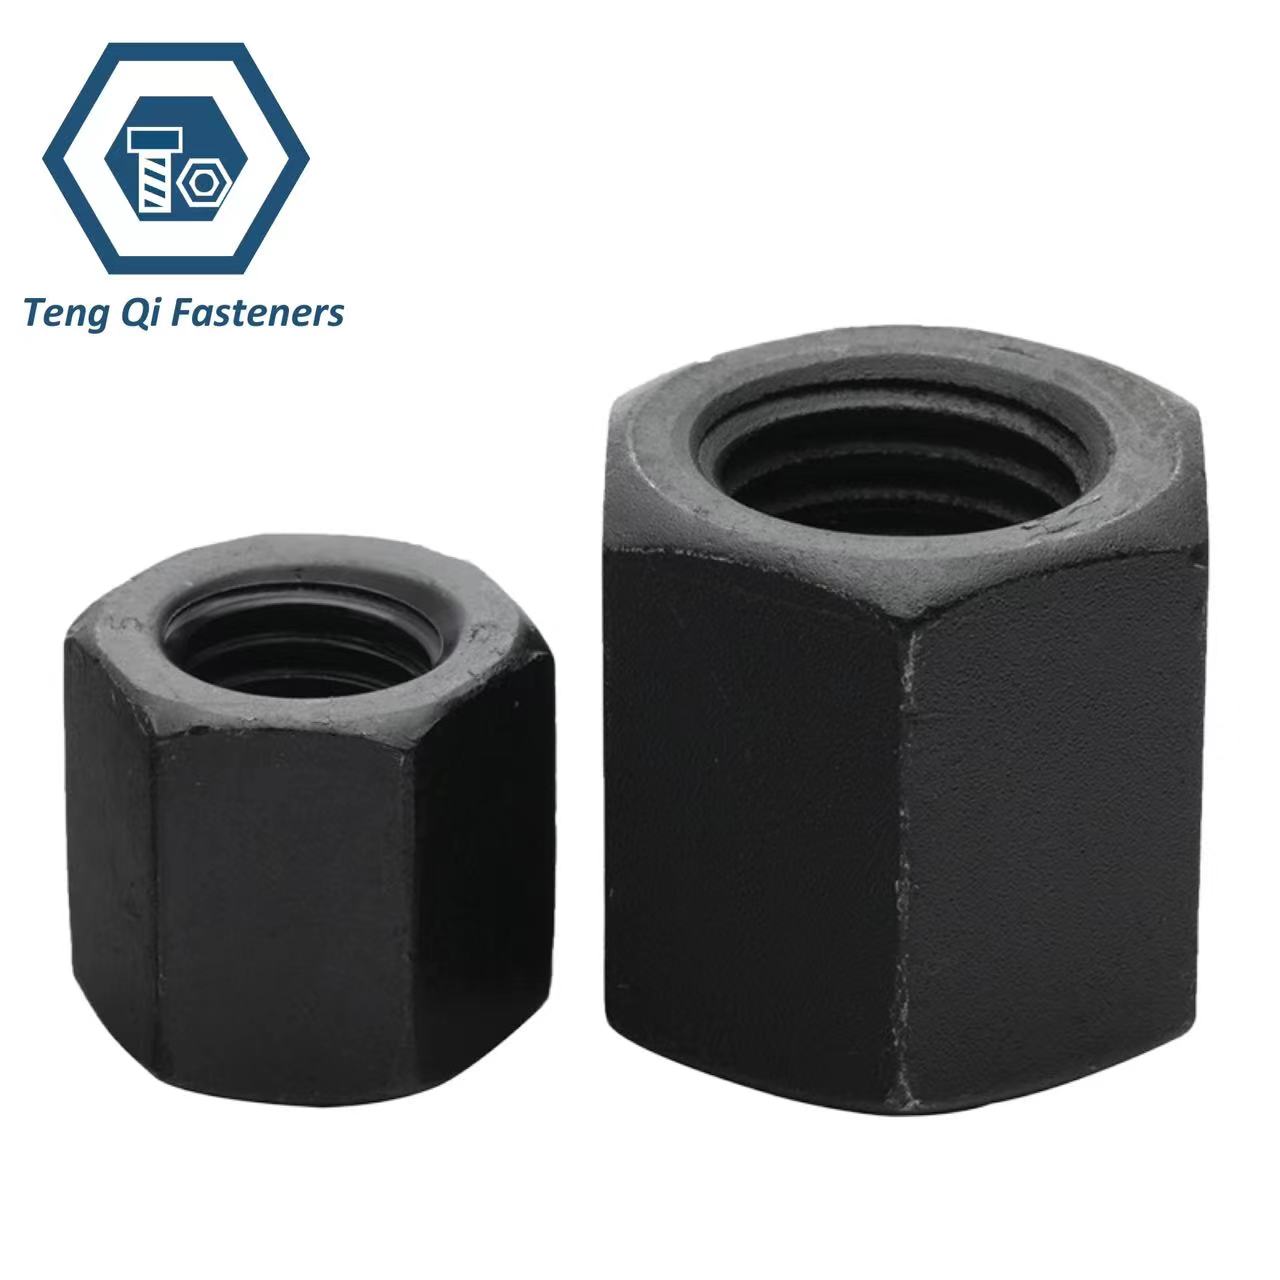 Class 8 High Strength Black DIN6330 Hex Thick Nuts